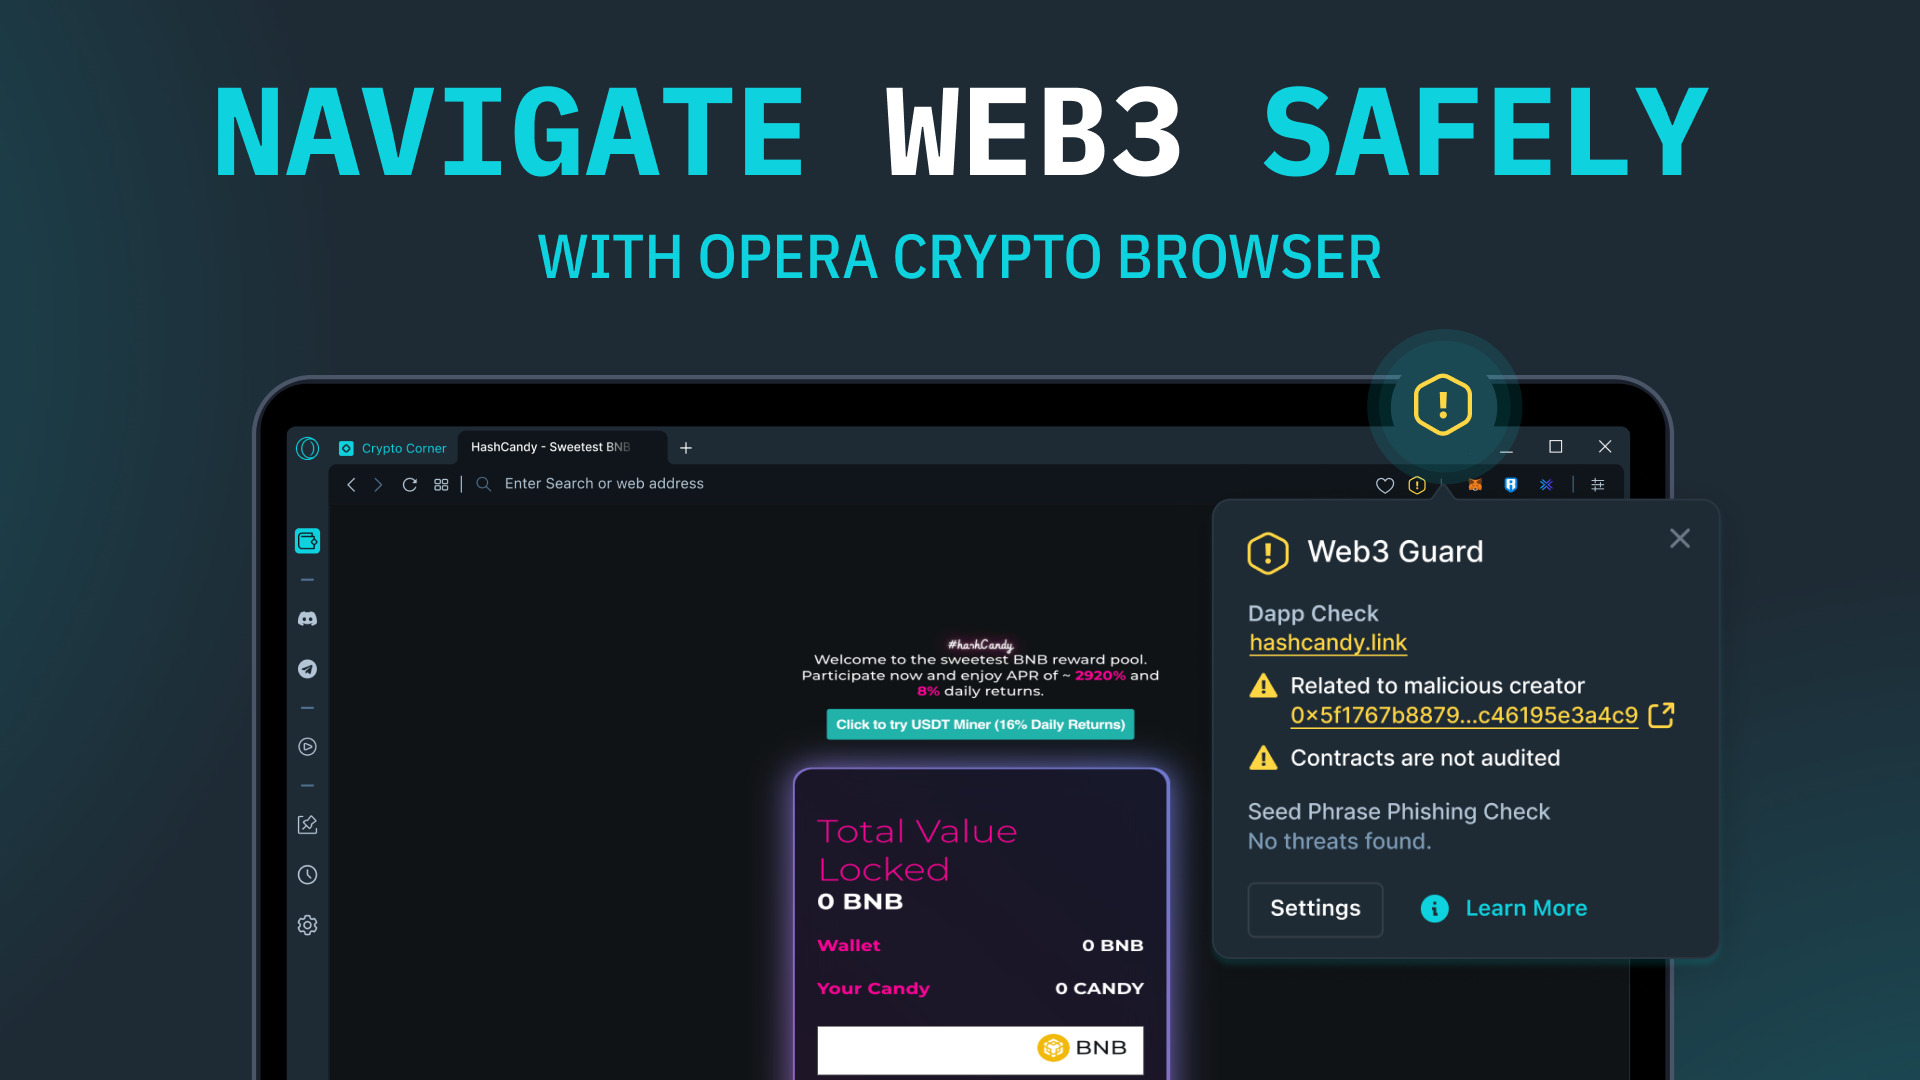 Opera Crypto Browser introduces Web3 Guard